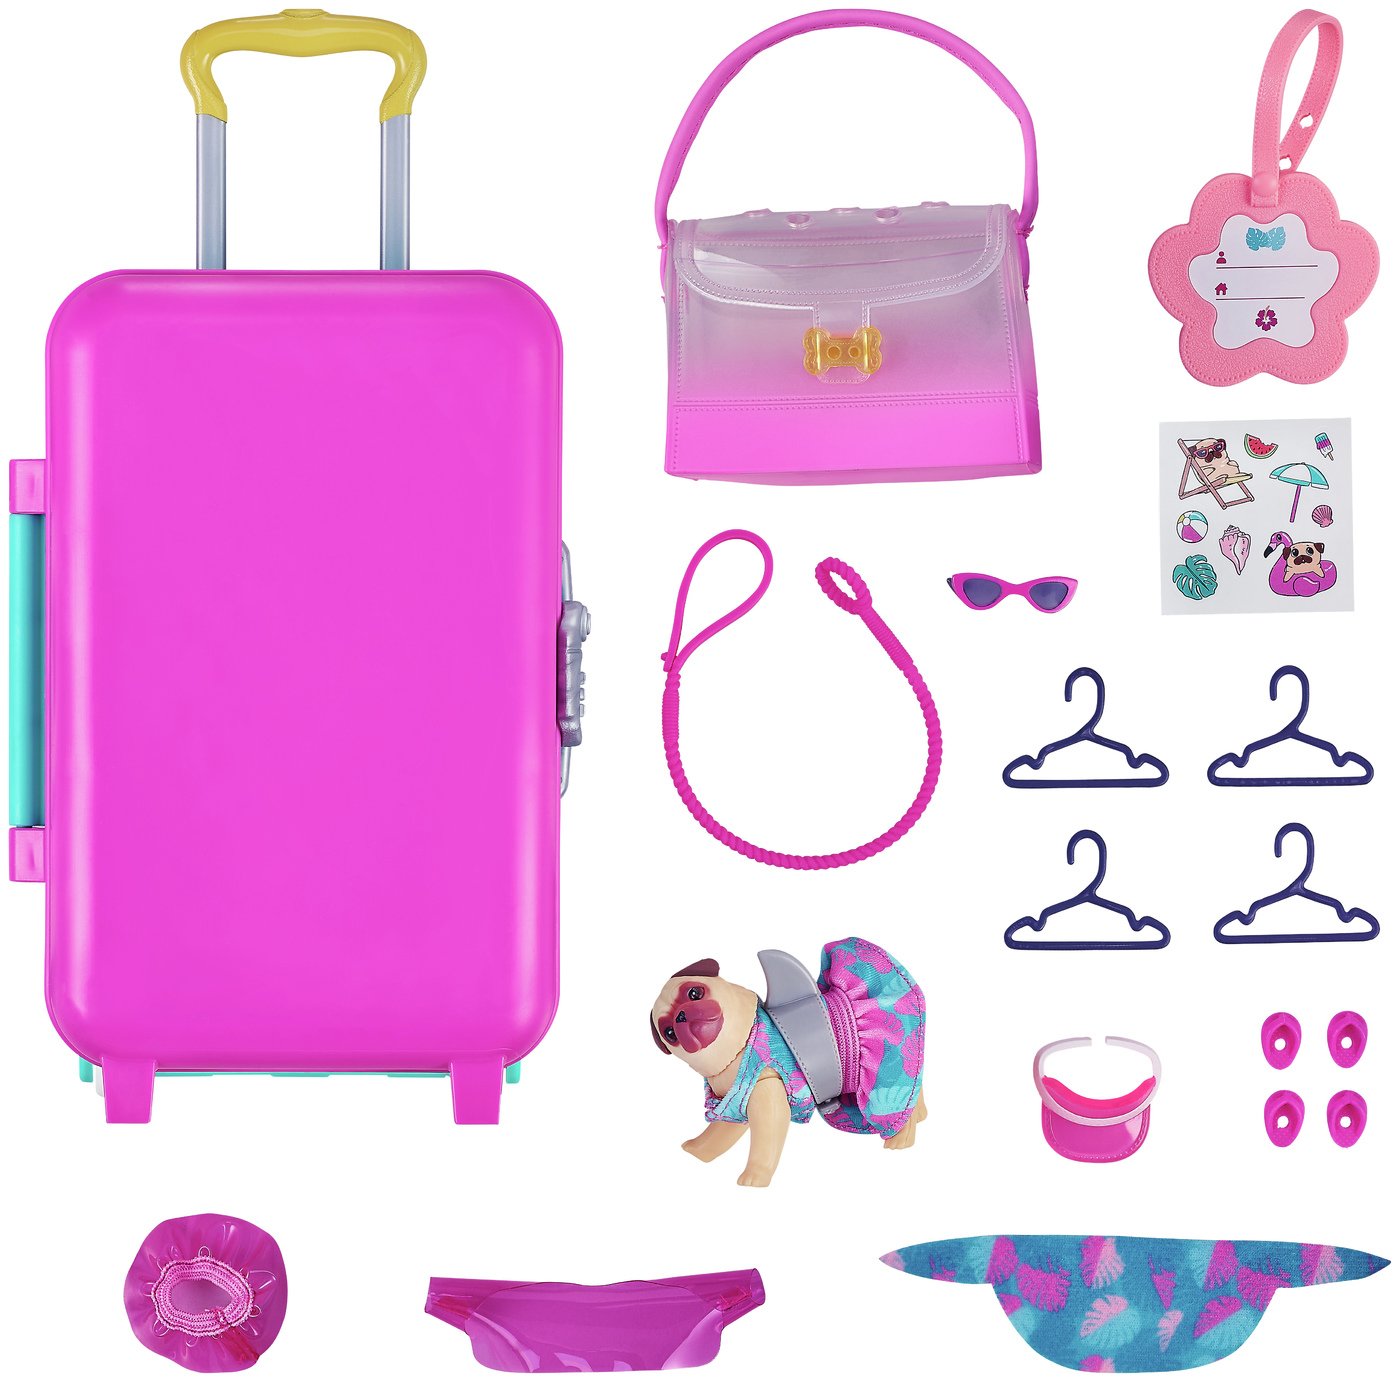 Real Littles Cutie Carries Pet Roller Case and Bag Pack